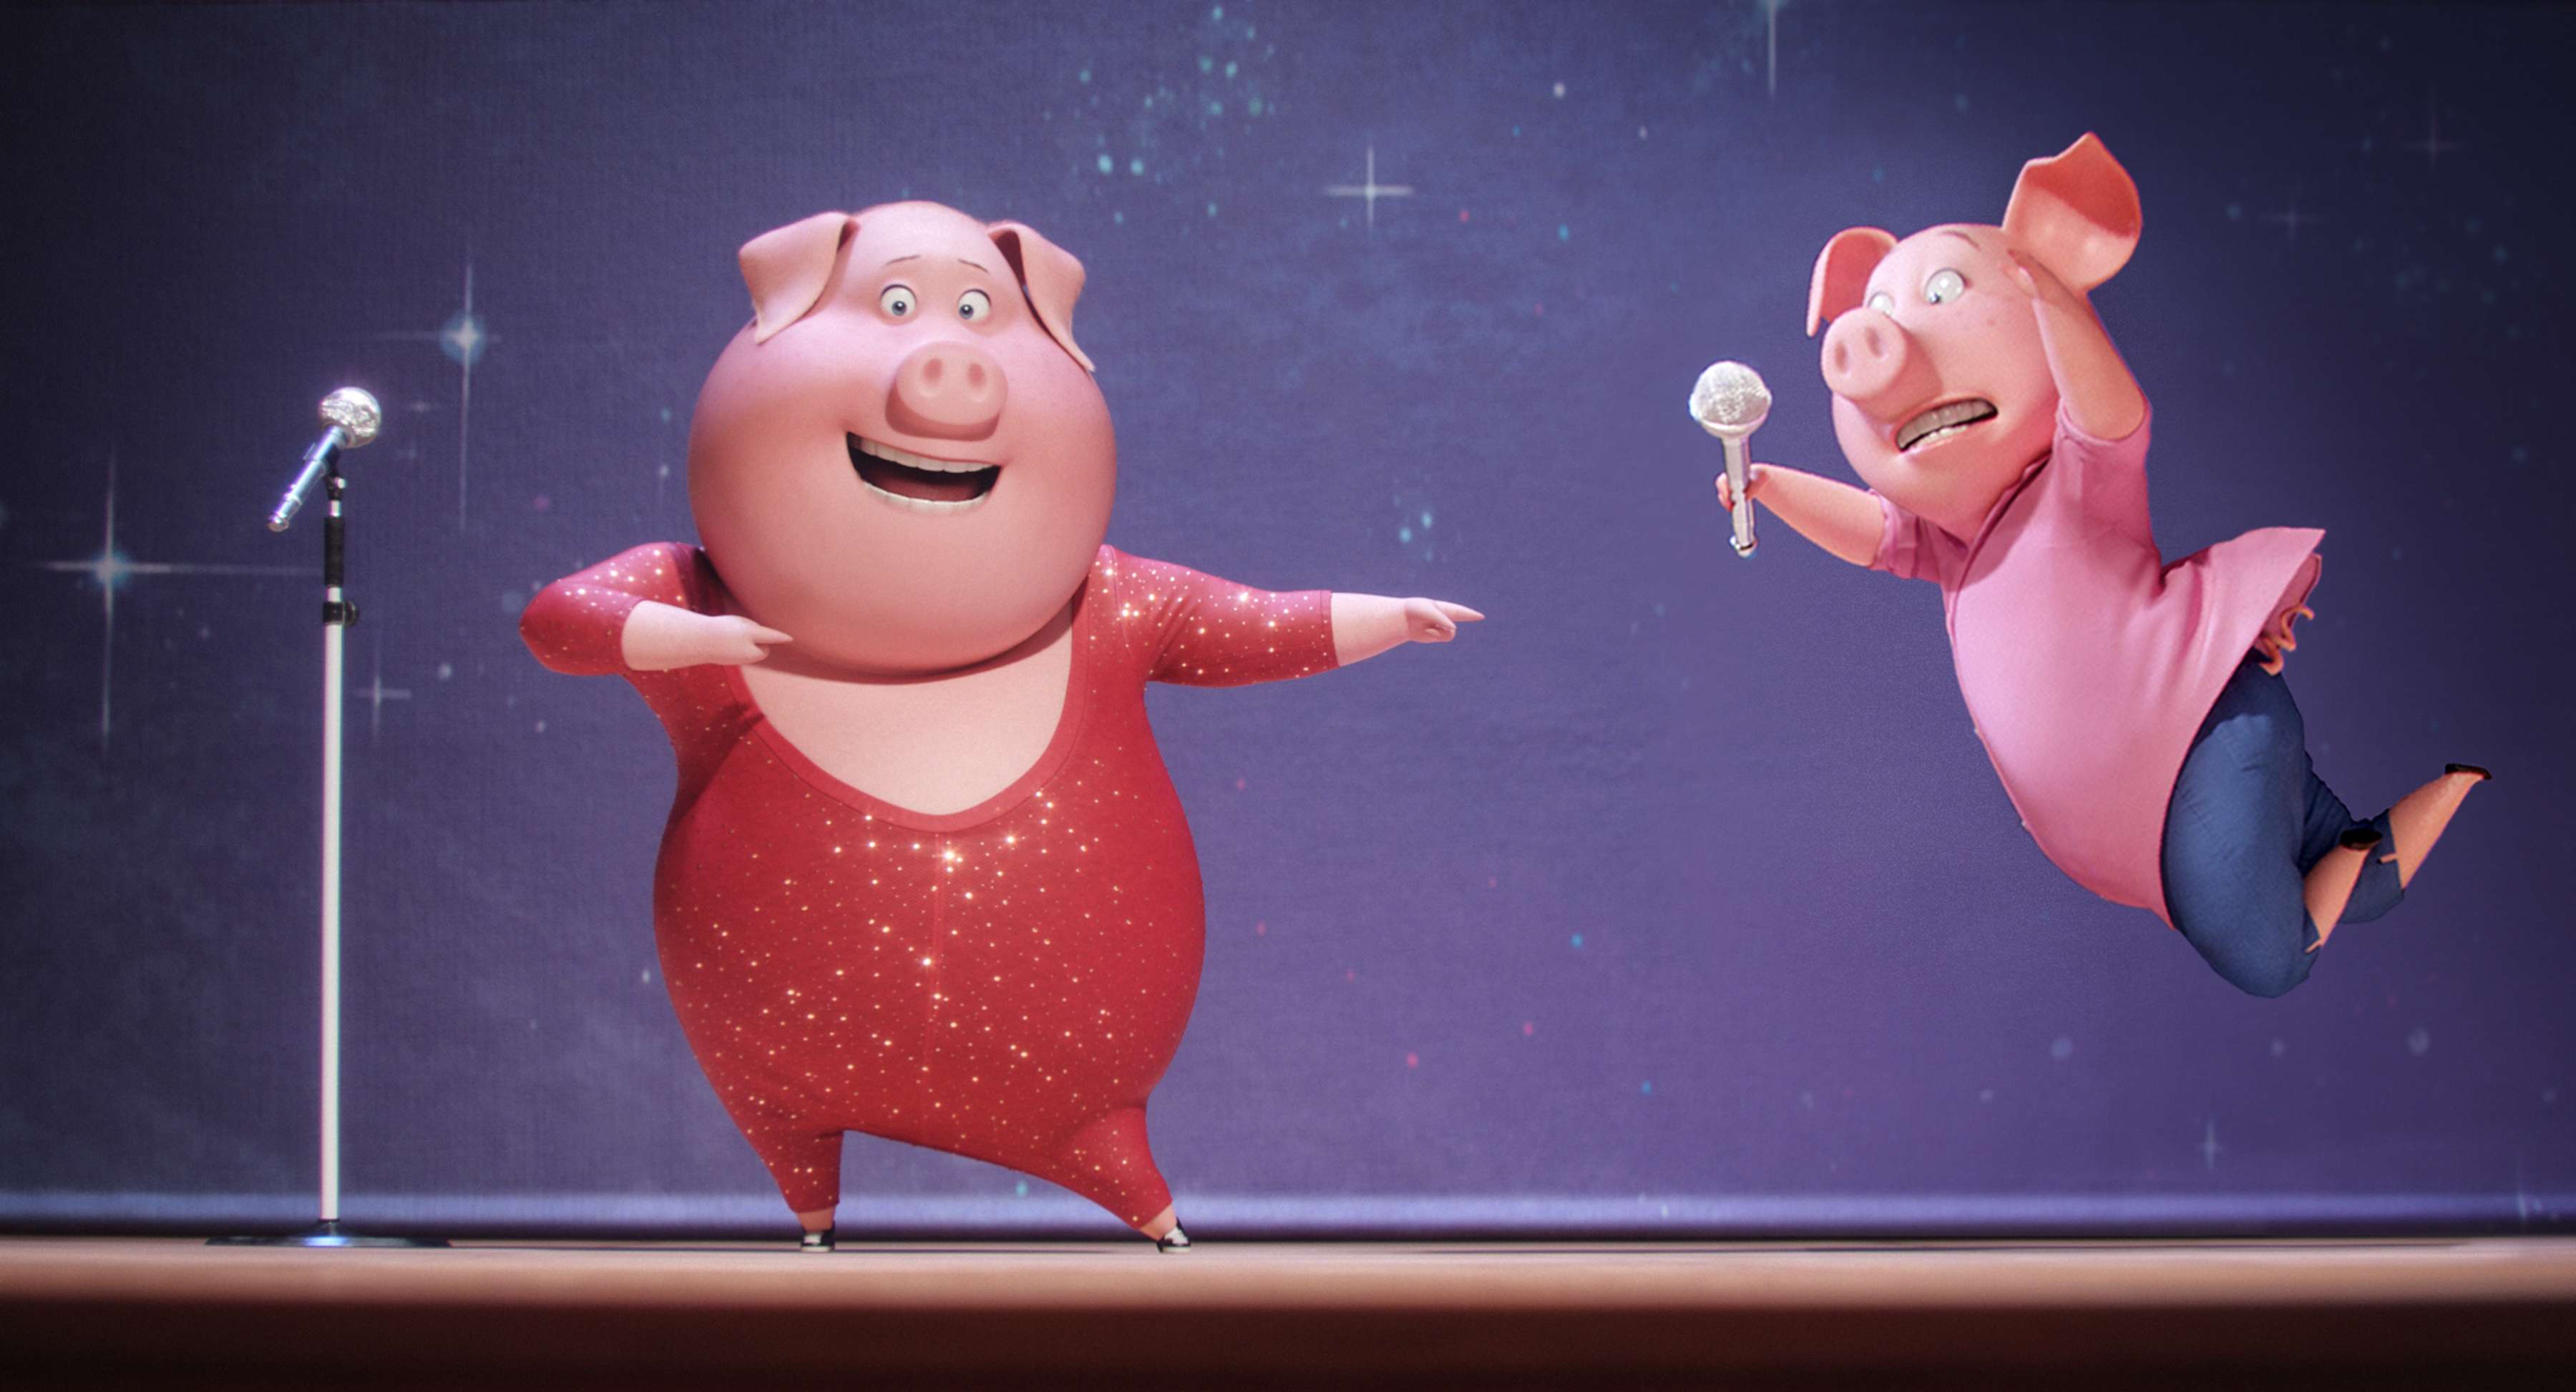 Film review: Sing – X-Factor meets Zootopia in comedy about singing contest  that's one of 2016's best animated movies | South China Morning Post